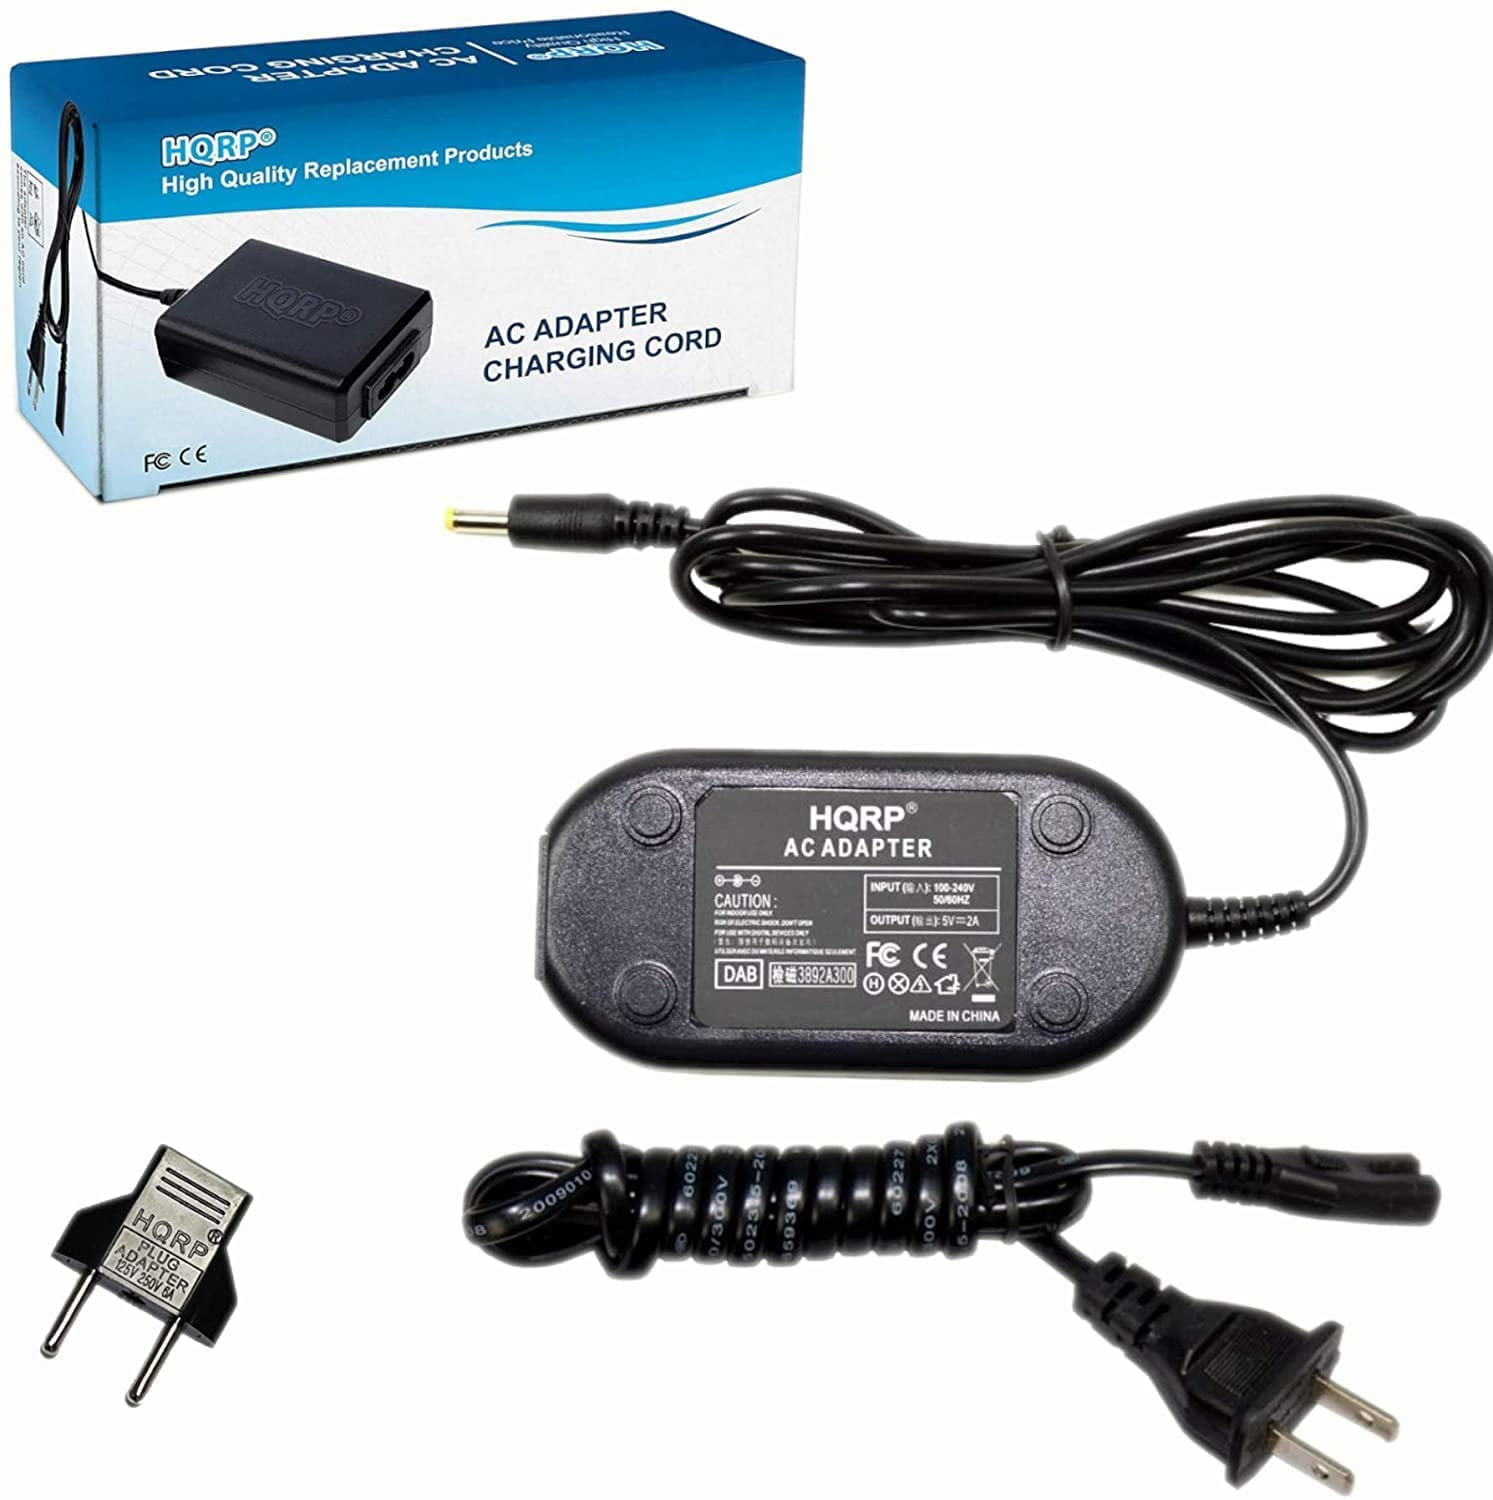 AC Power Adapters Battery Chargers Assorted Brands & Models Huge Adapter Choice 